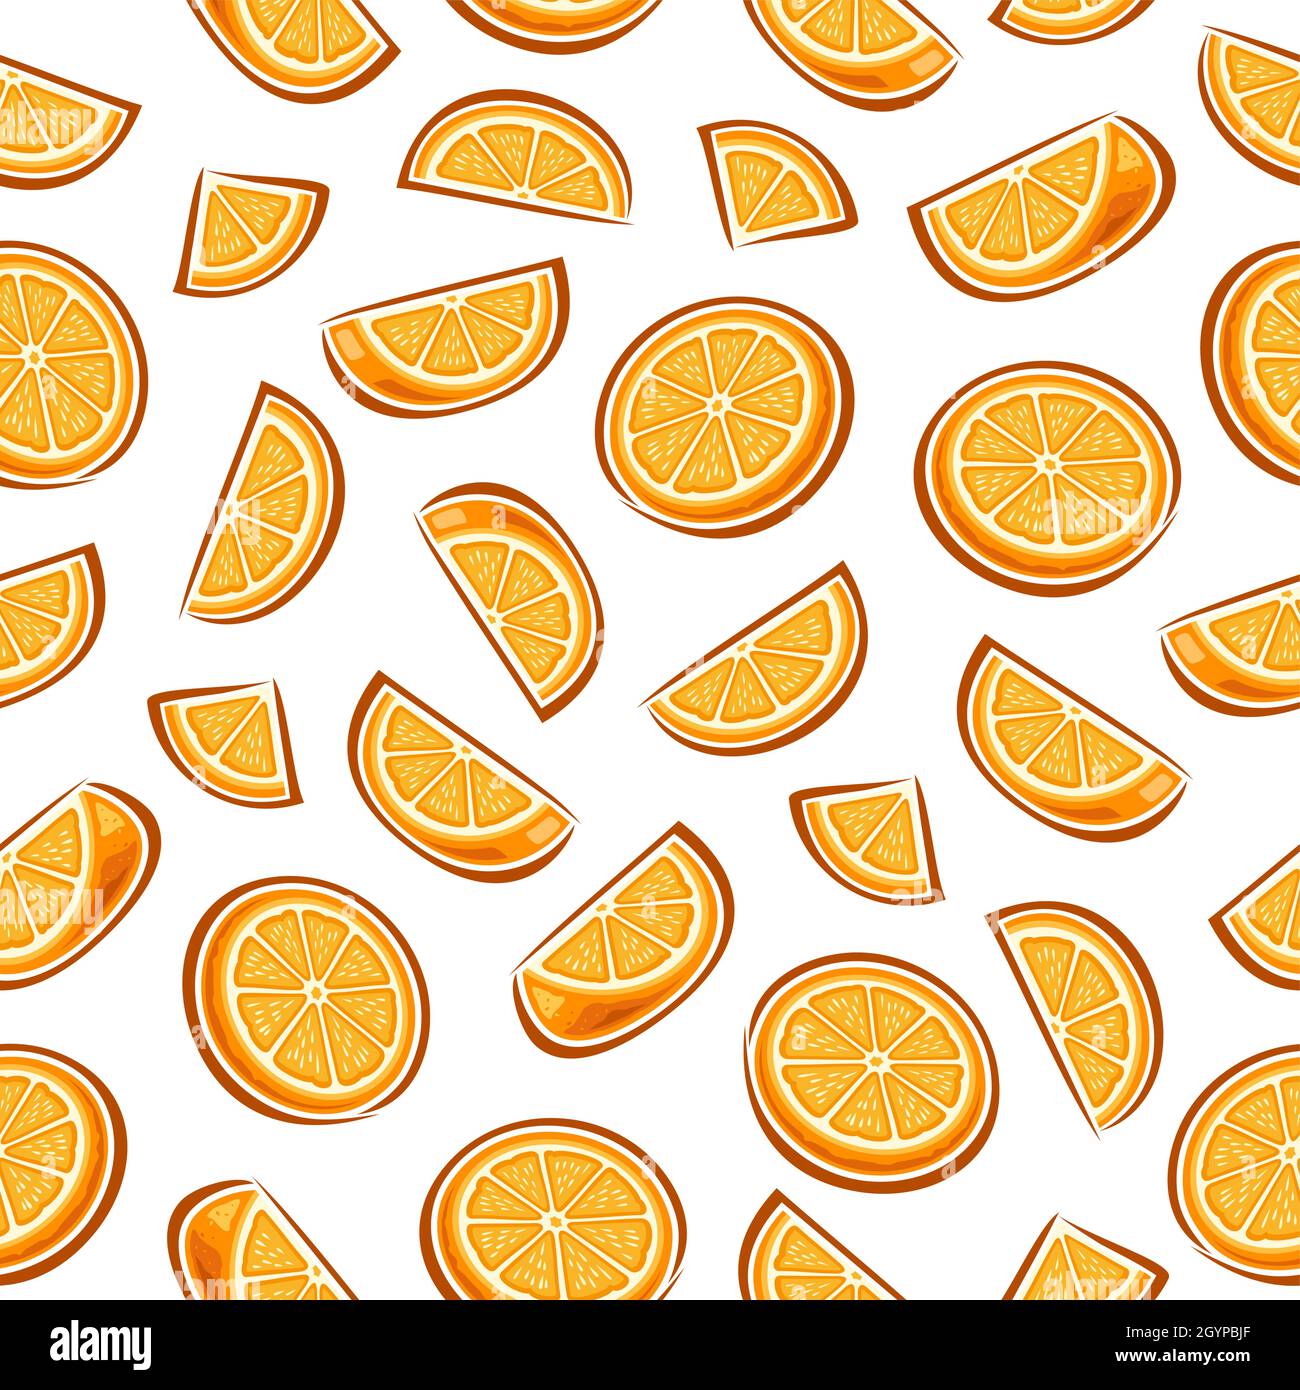 Vector Orange Seamless Pattern, square repeating background with group of sliced cartoon oranges, poster with cutout illustrations of different ripe c Stock Vector